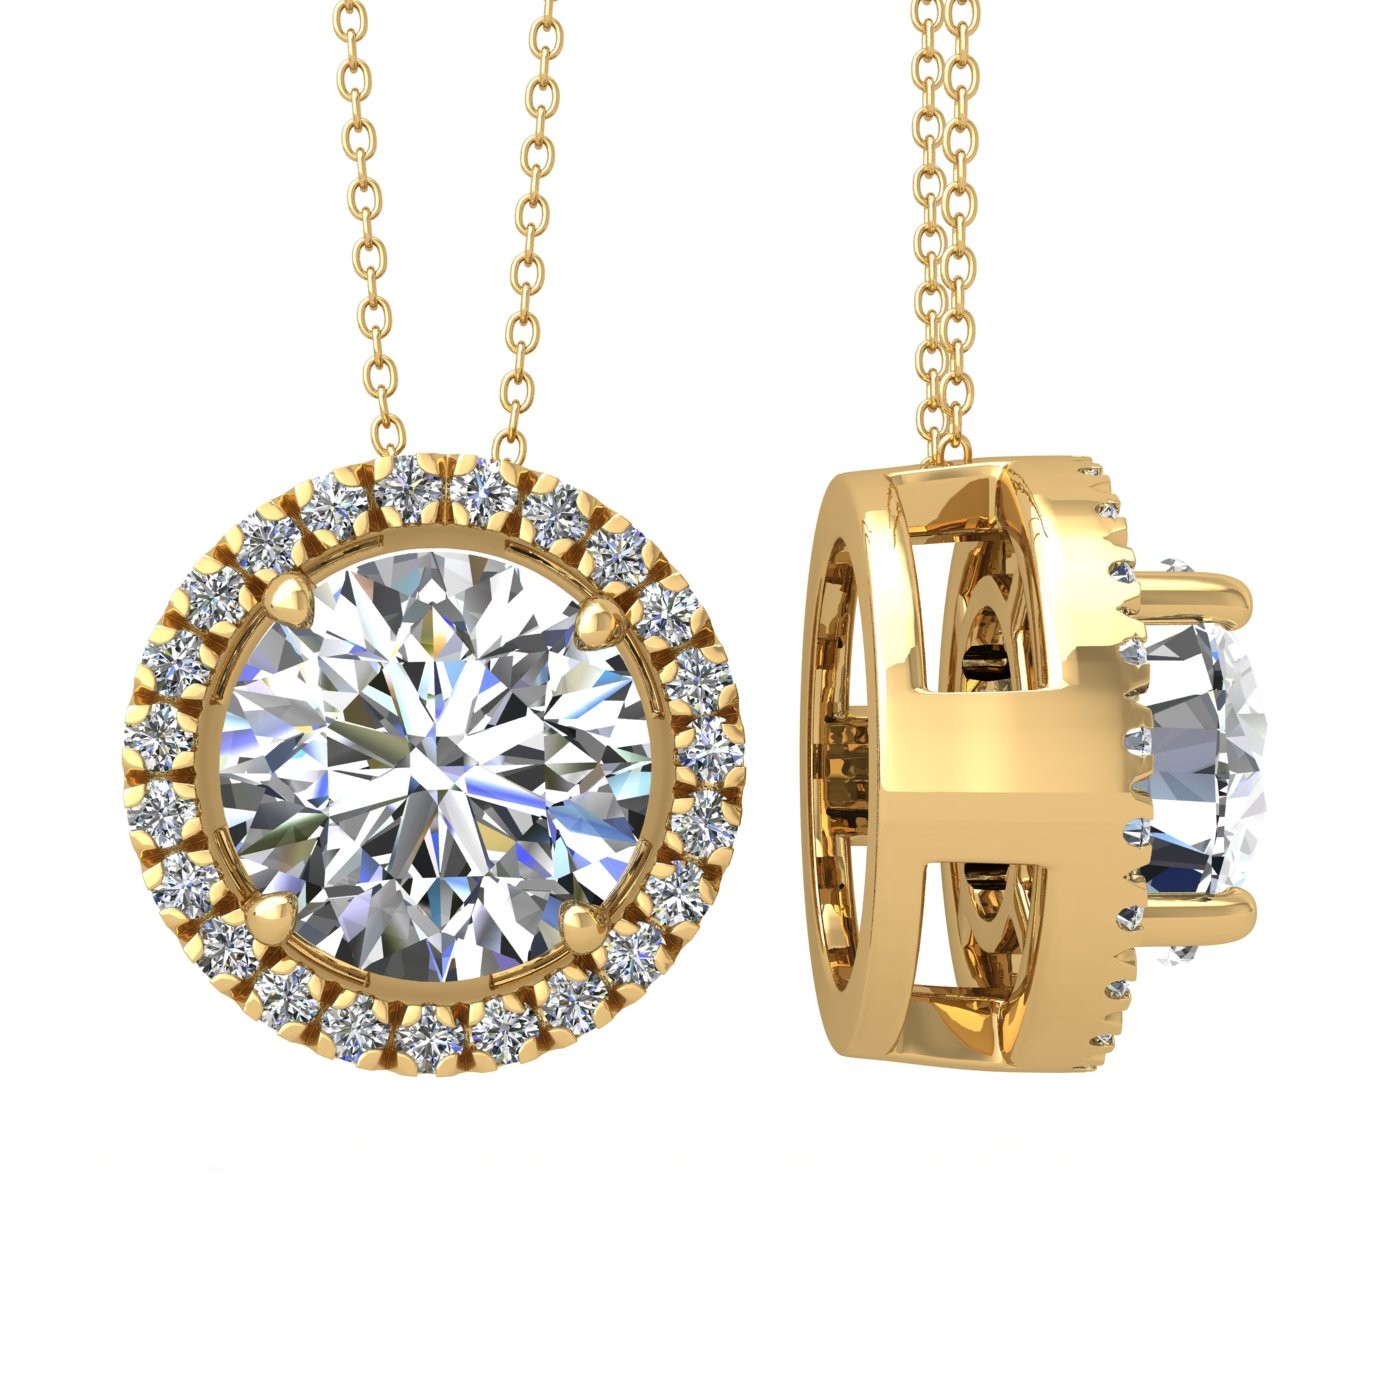 18k yellow gold 0,3 ct 4 prong round shape diamond pendant with diamond pavÉ set halo including chain seperate from the pendant Photos & images